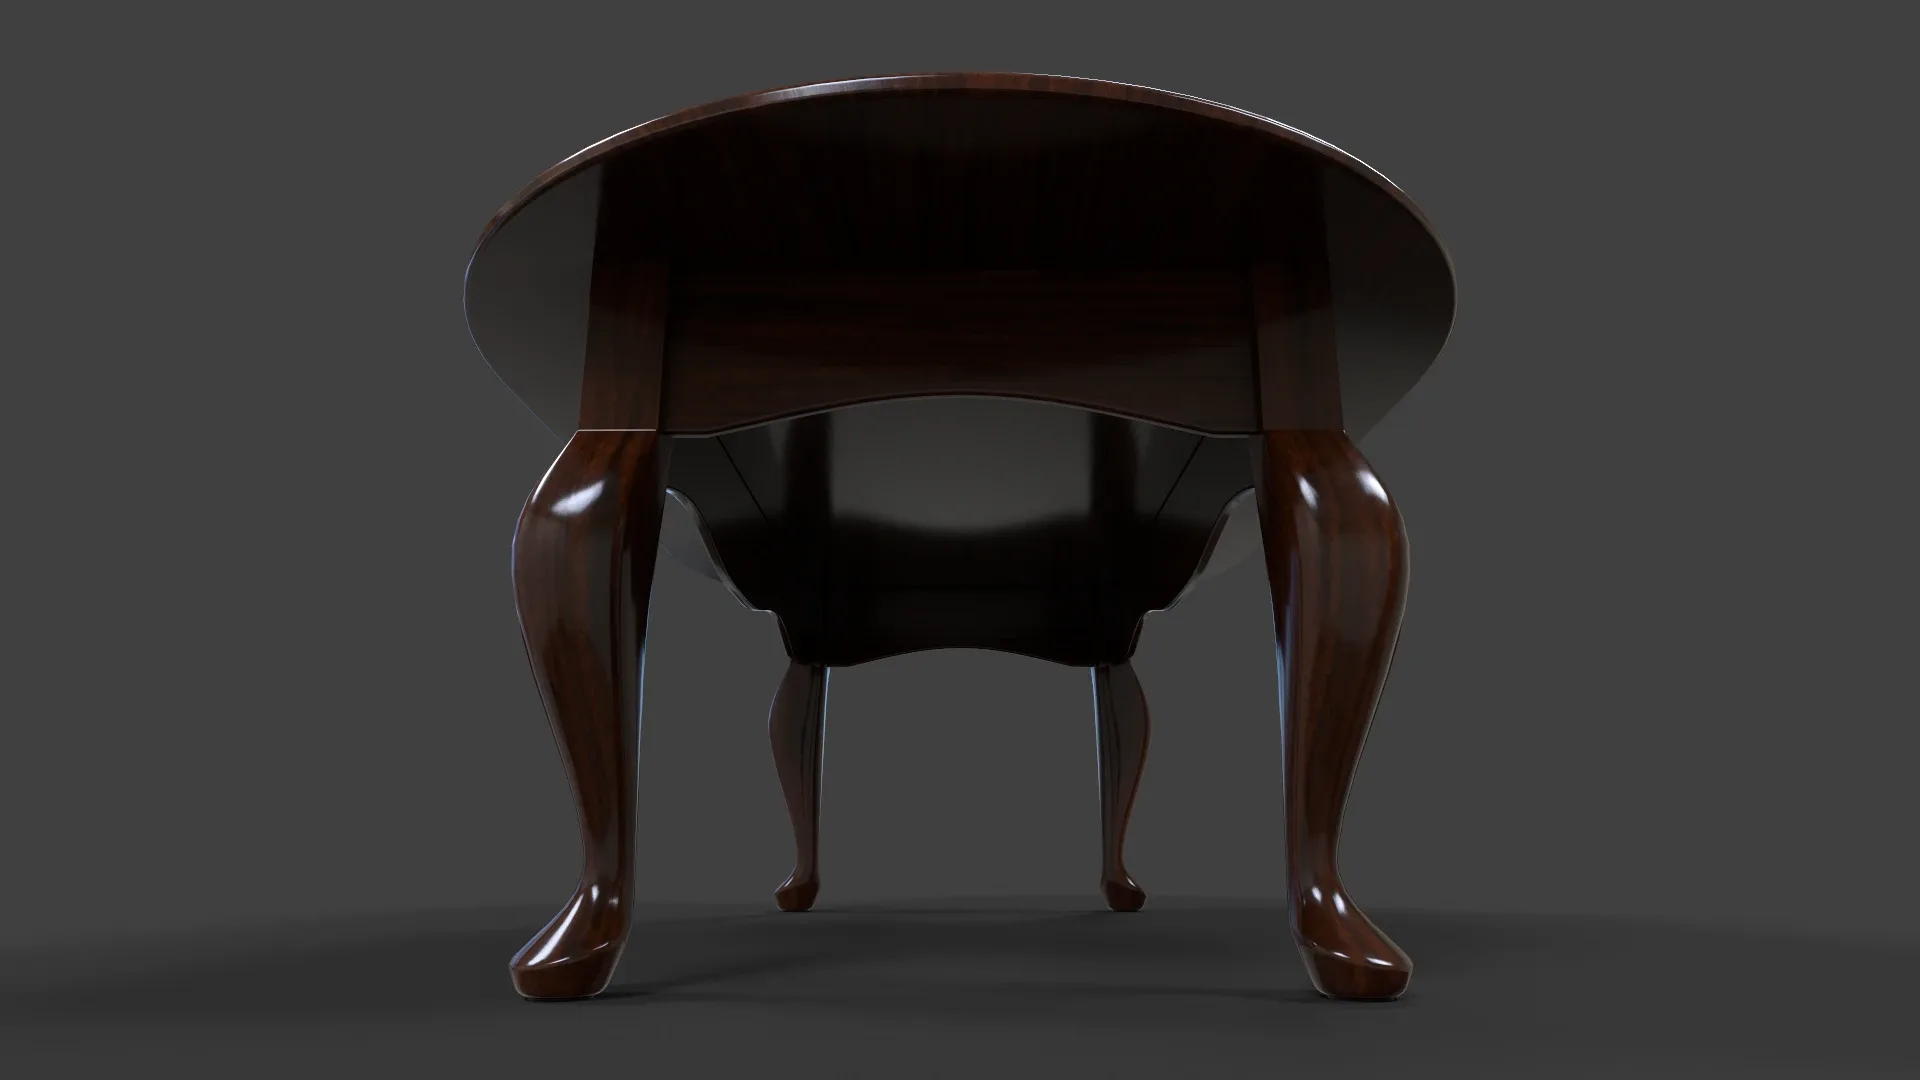 Oval Cofee Table - Low Poly